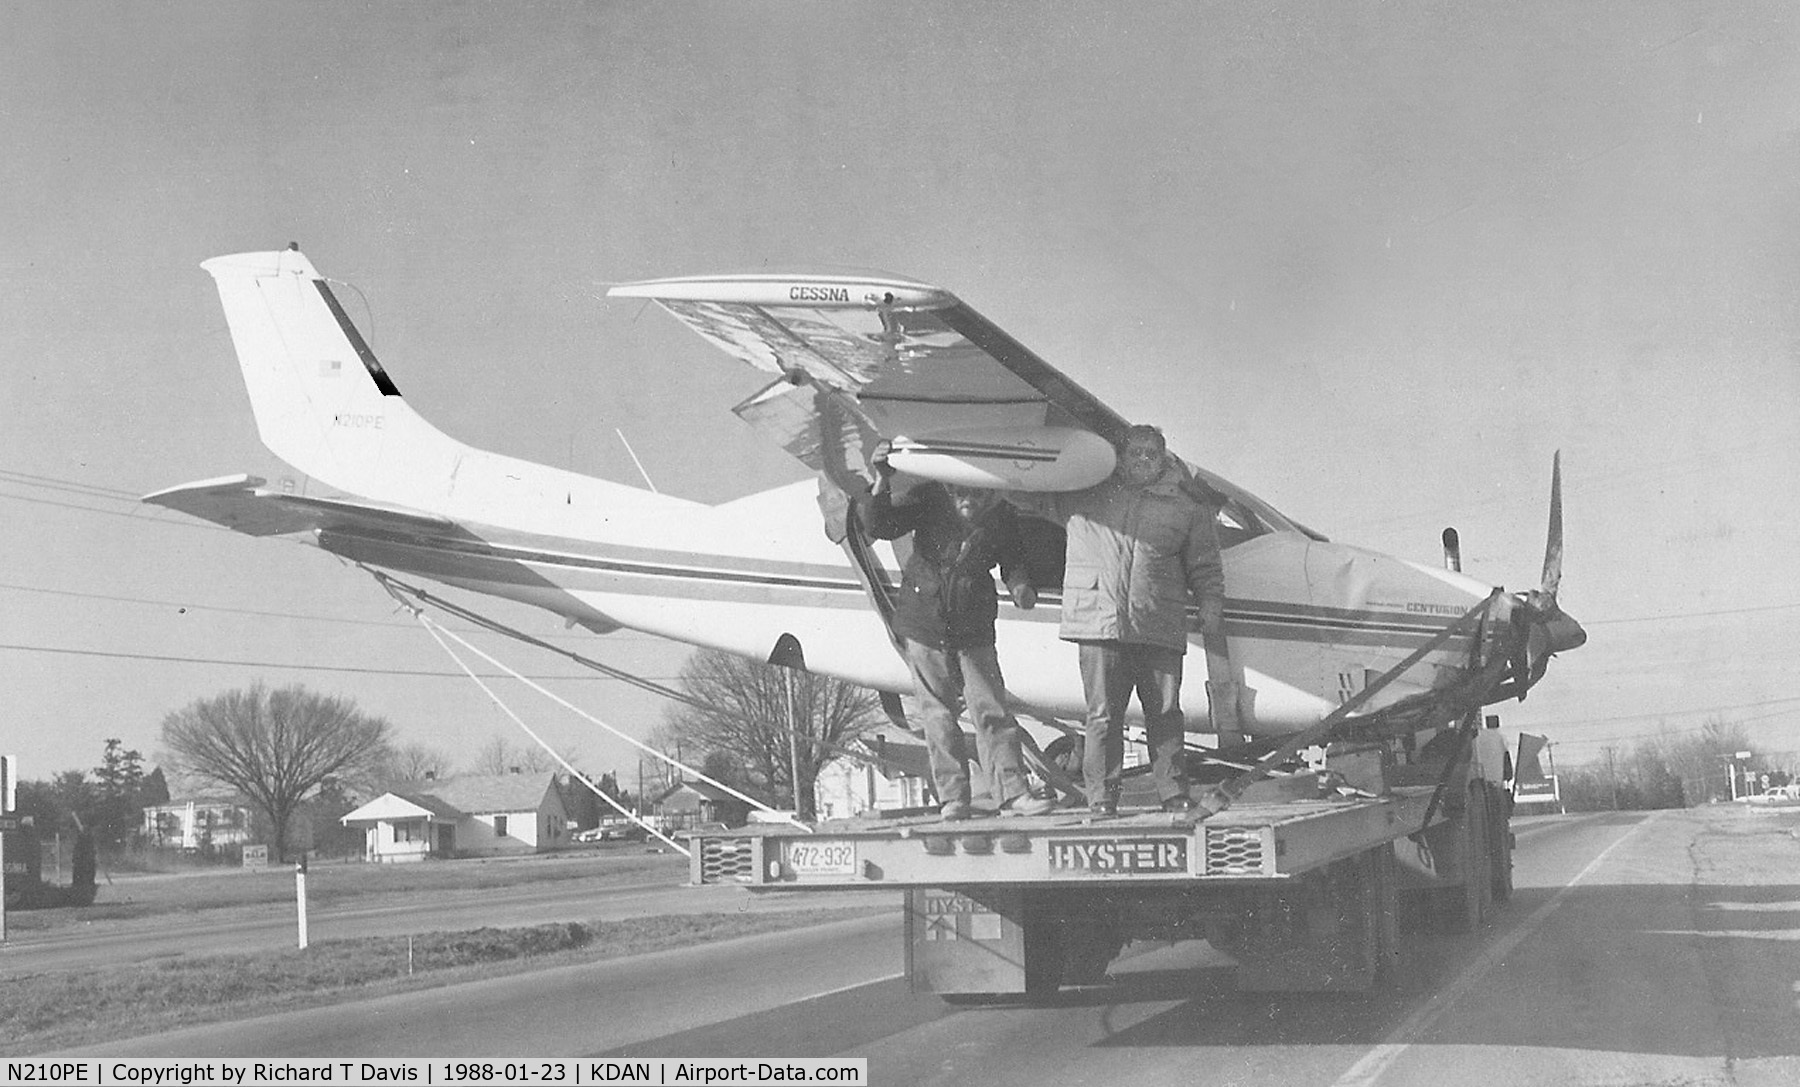 N210PE, 1969 Cessna 210J Centurion C/N 21059180, N210PE 1969 Cesna 210PE moves along on a trailer on 58 East back to KDAN ...it had crashed Jan. 21,1988 about 2 miles from the airport after it ran out of fuel..NTSB  BFO88LA015...thats Mike Rembold of General Aviation at right on the back...